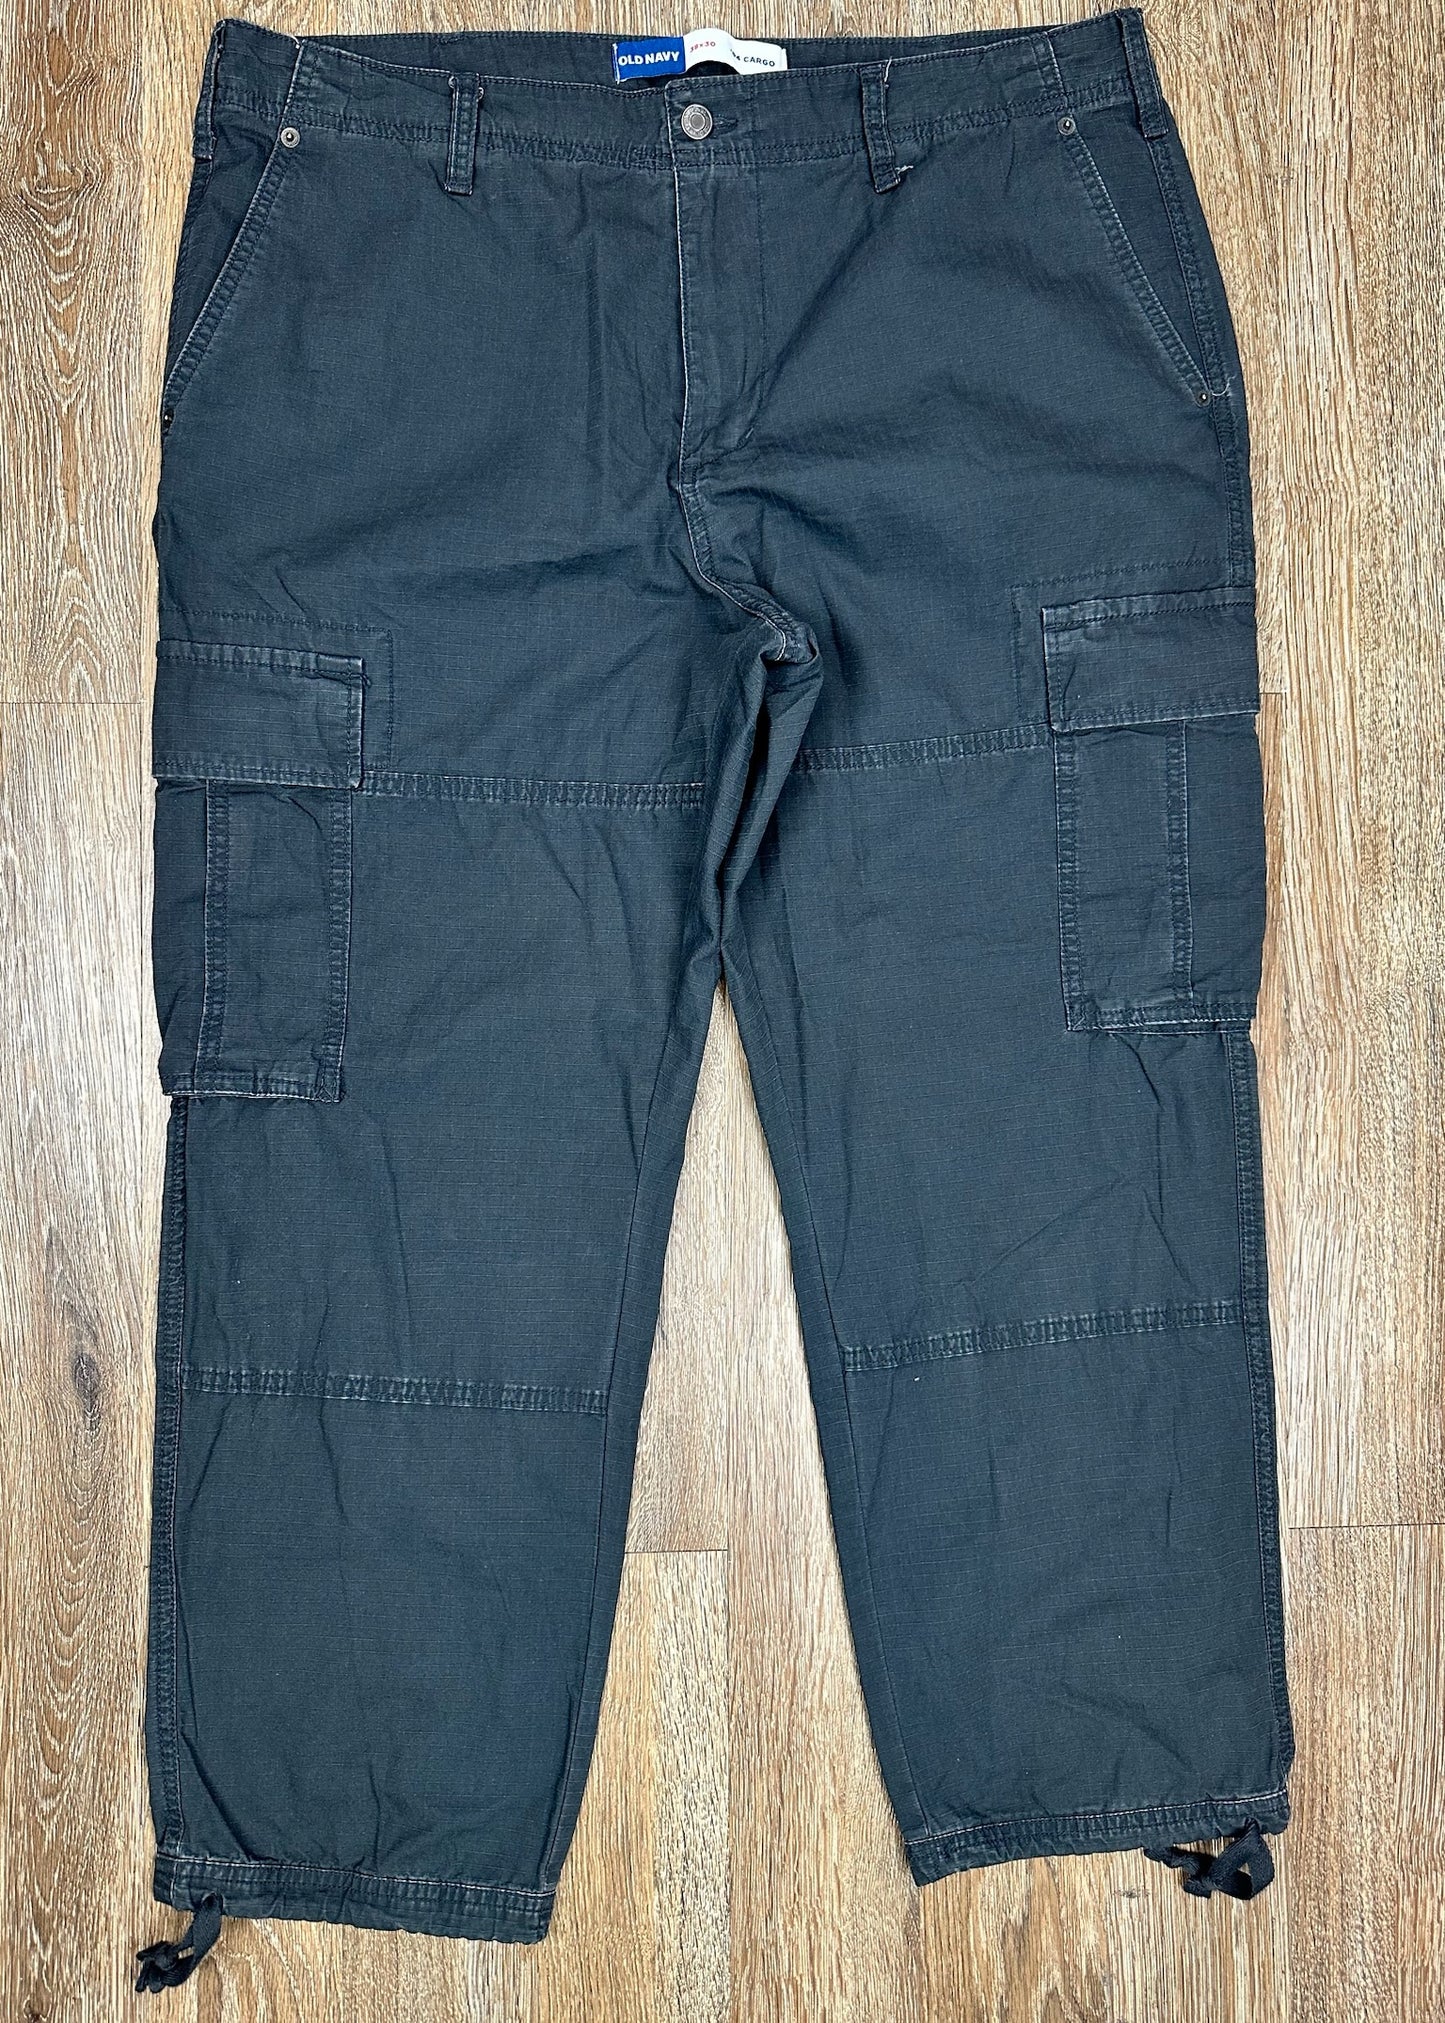 Mens Grey Cargo Pants by Old Navy